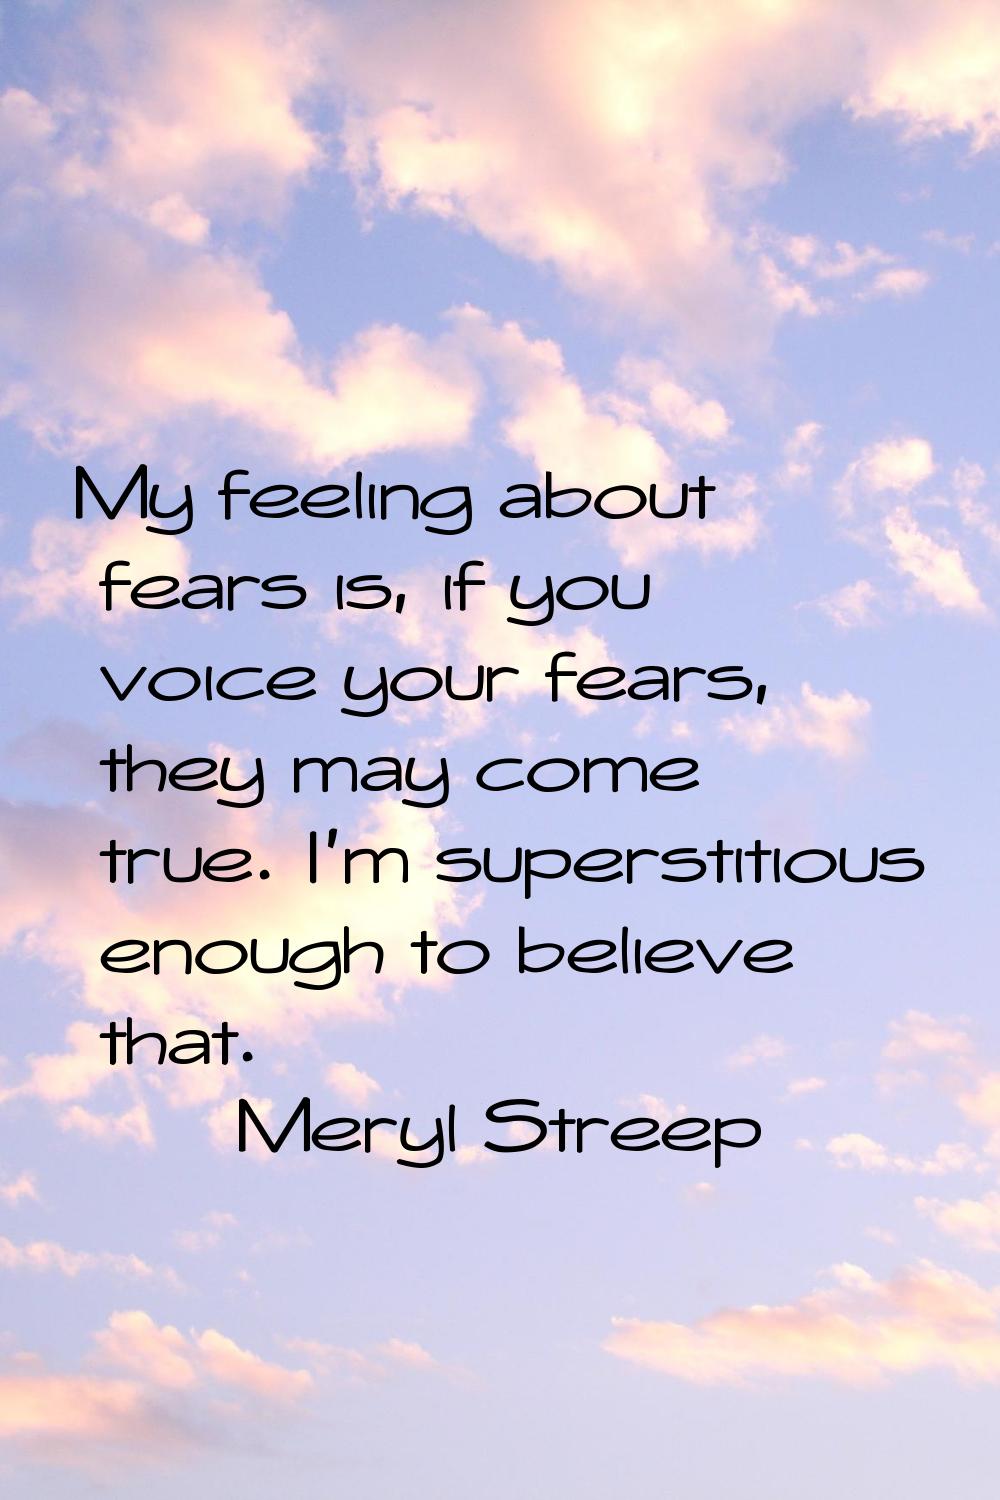 My feeling about fears is, if you voice your fears, they may come true. I'm superstitious enough to